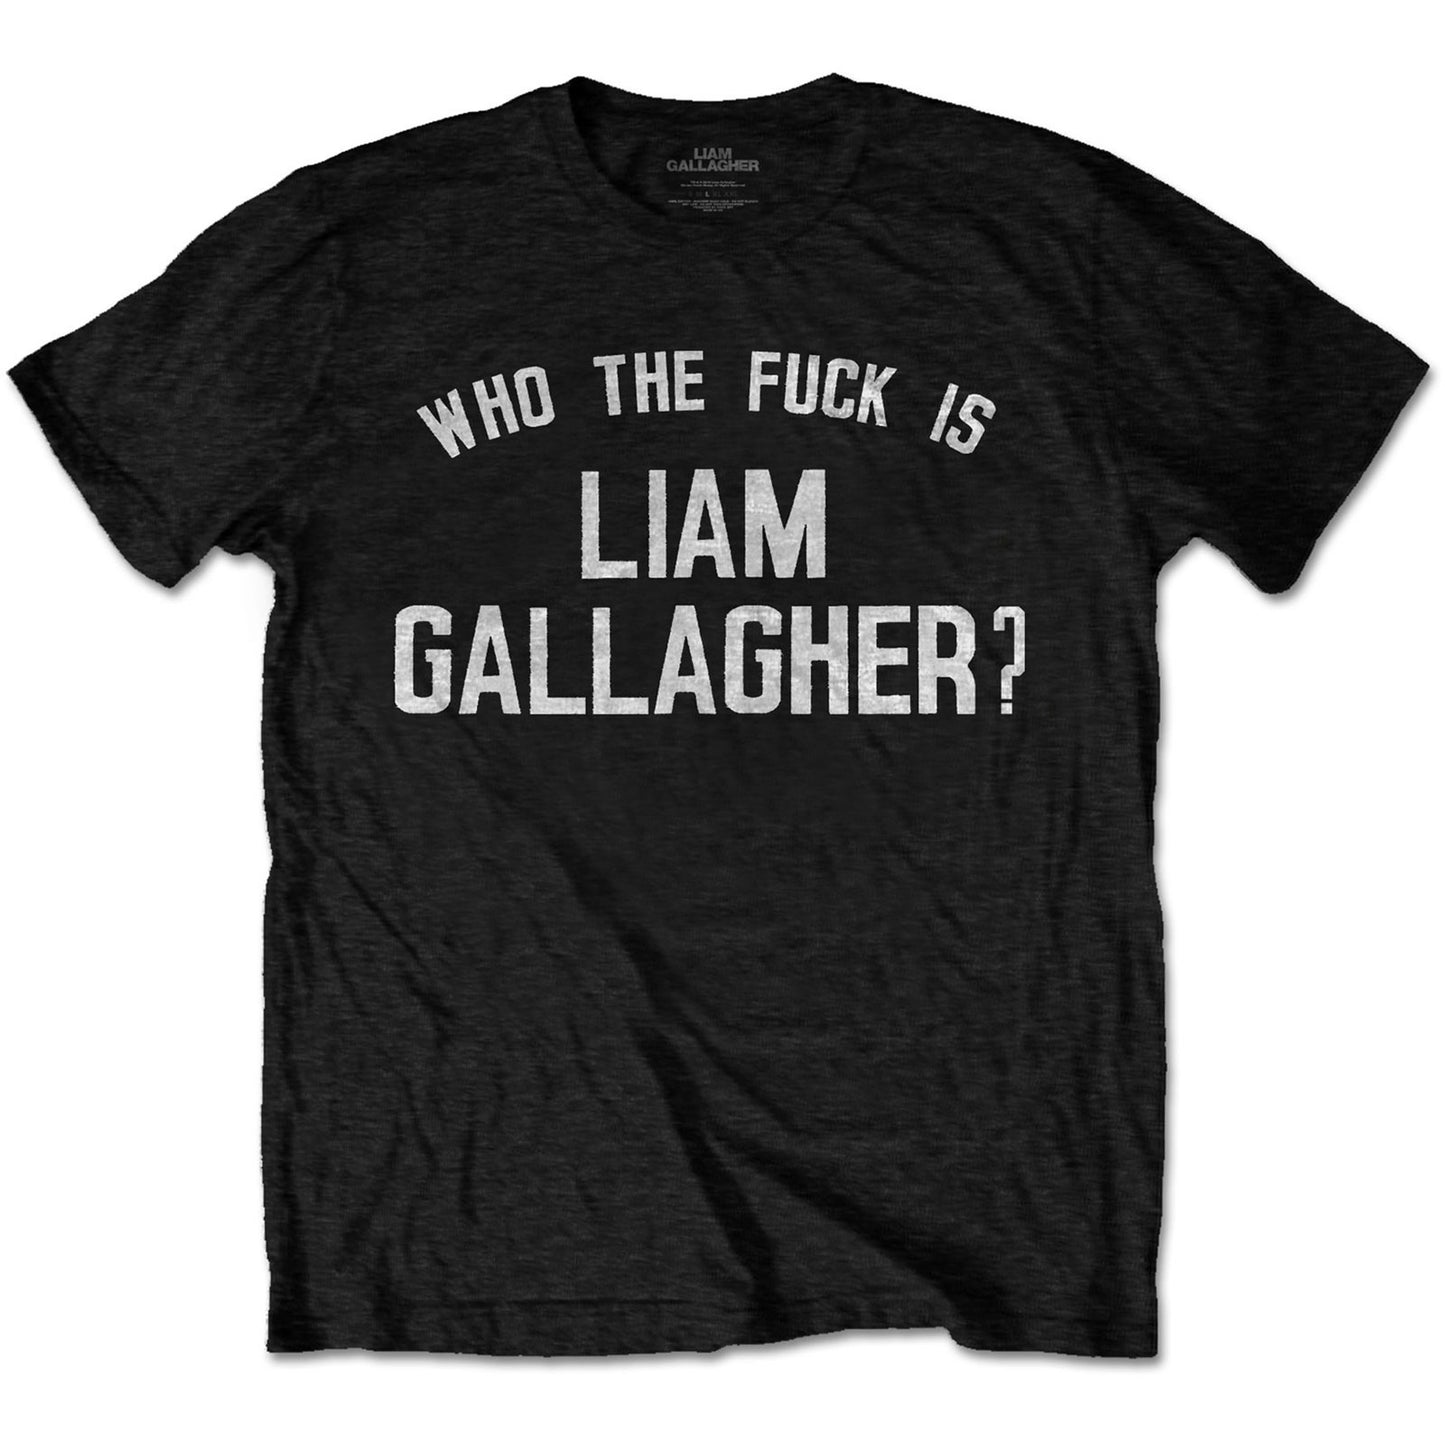 Liam Gallagher Who the fuck is Liam Gallagher? Tee